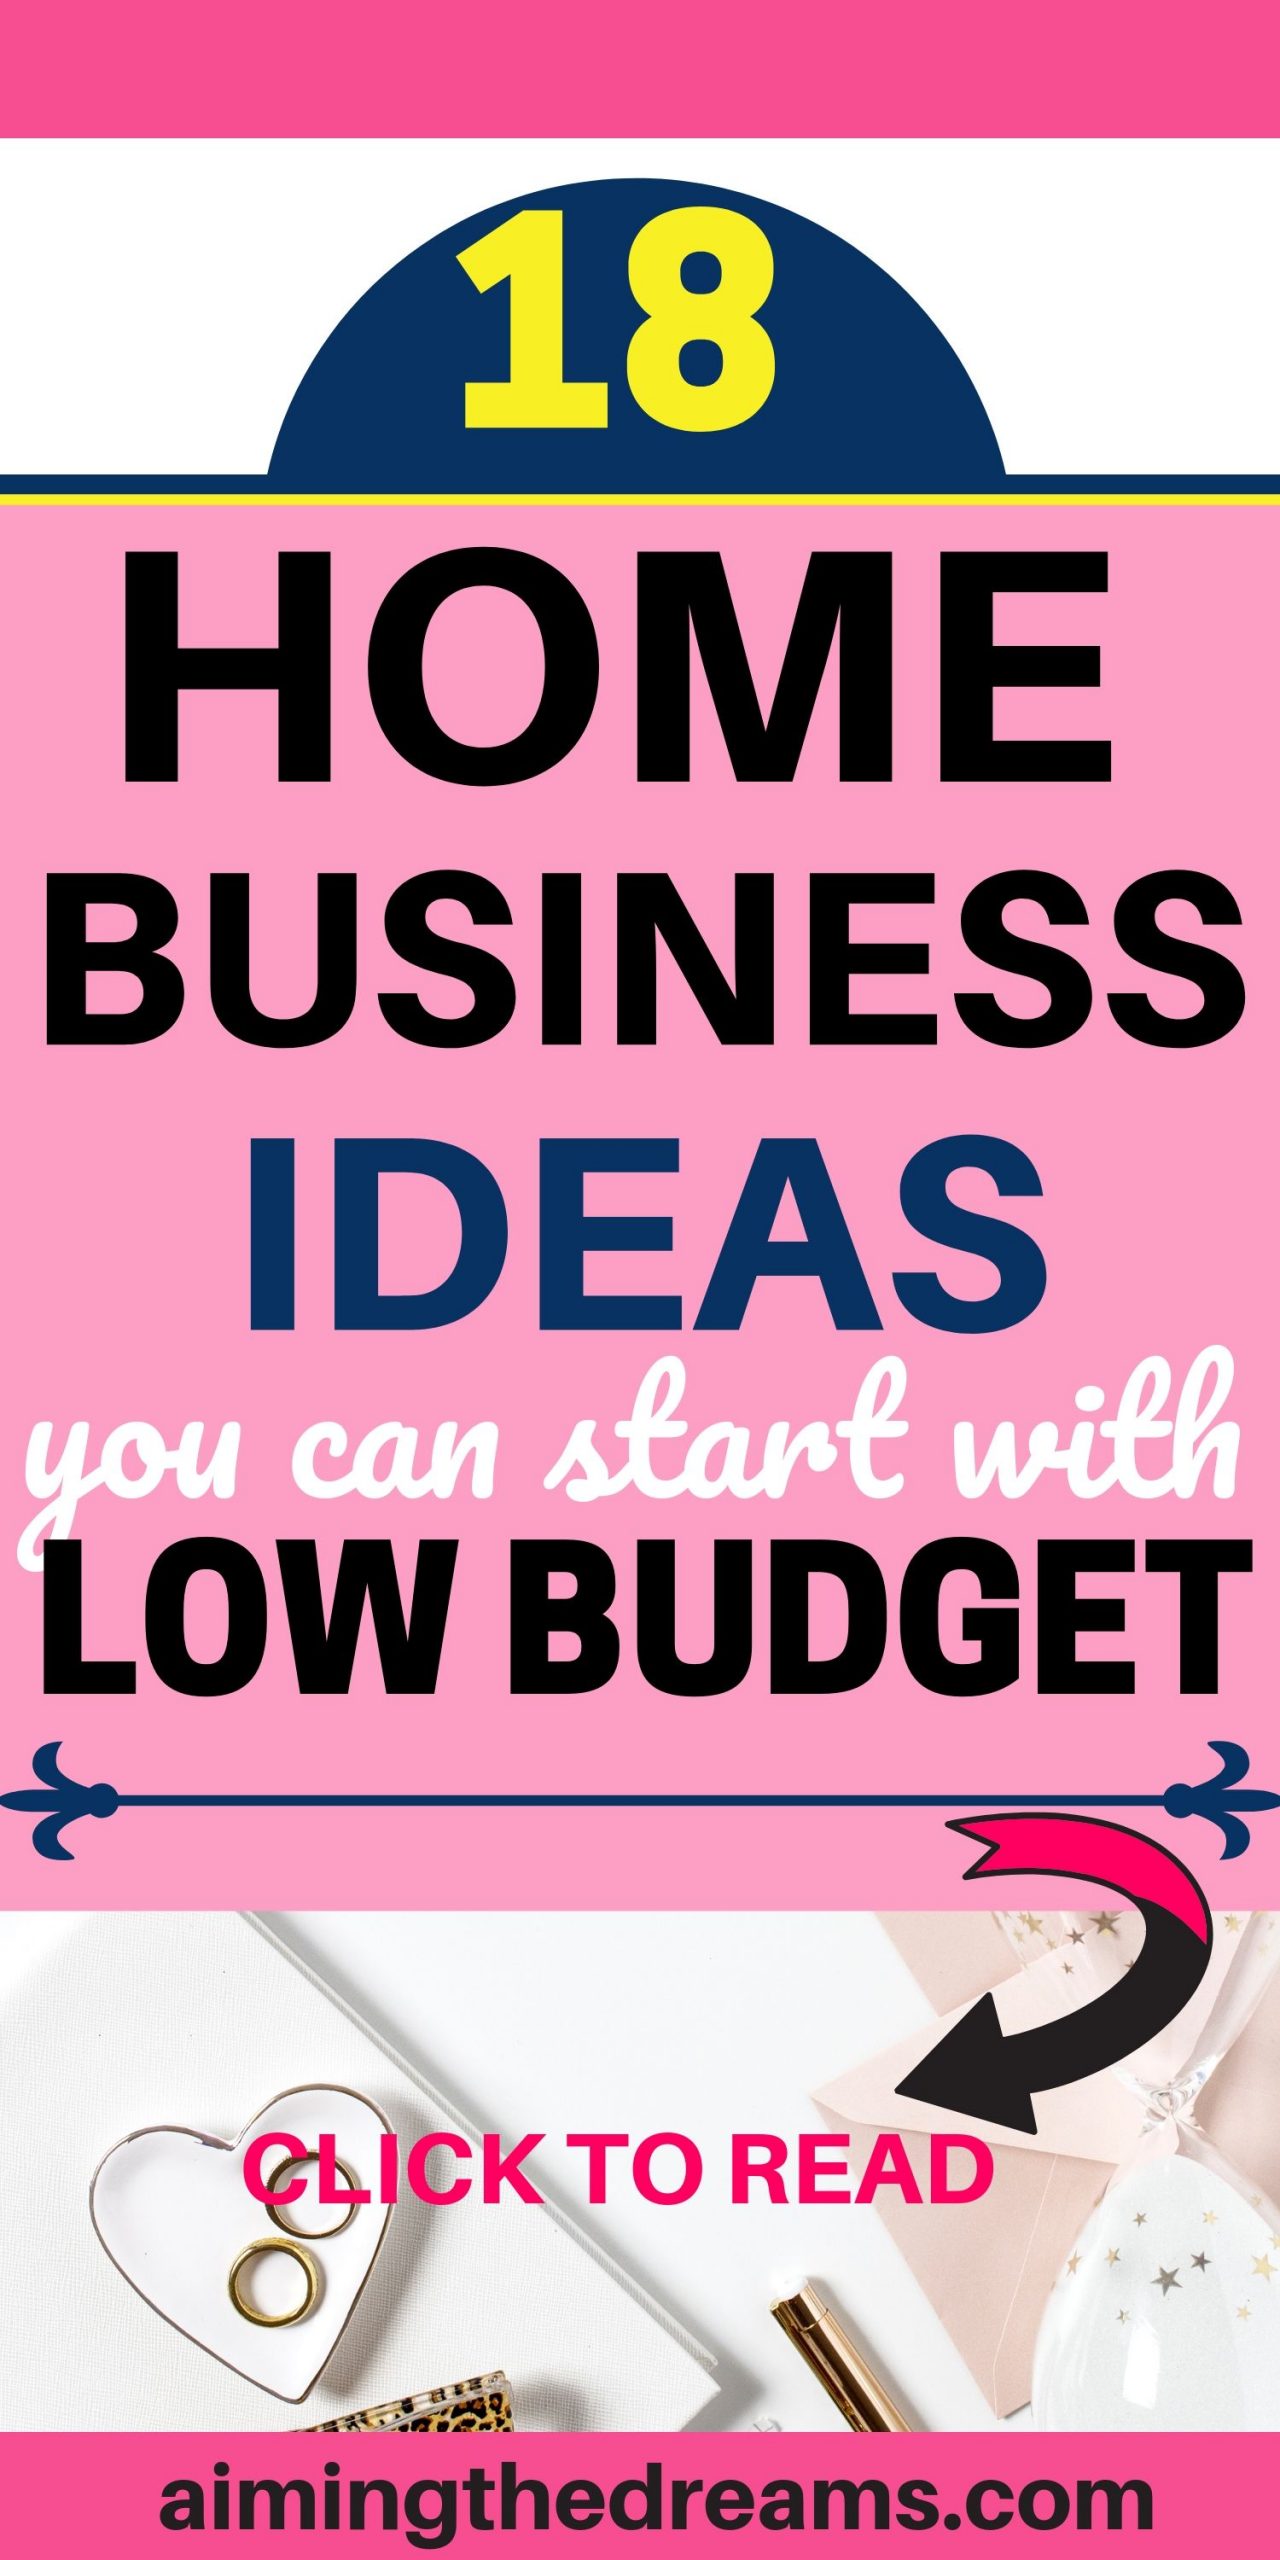 18 home business ideas you can start with low budget. Side hustle ideas let you make money and work from home.